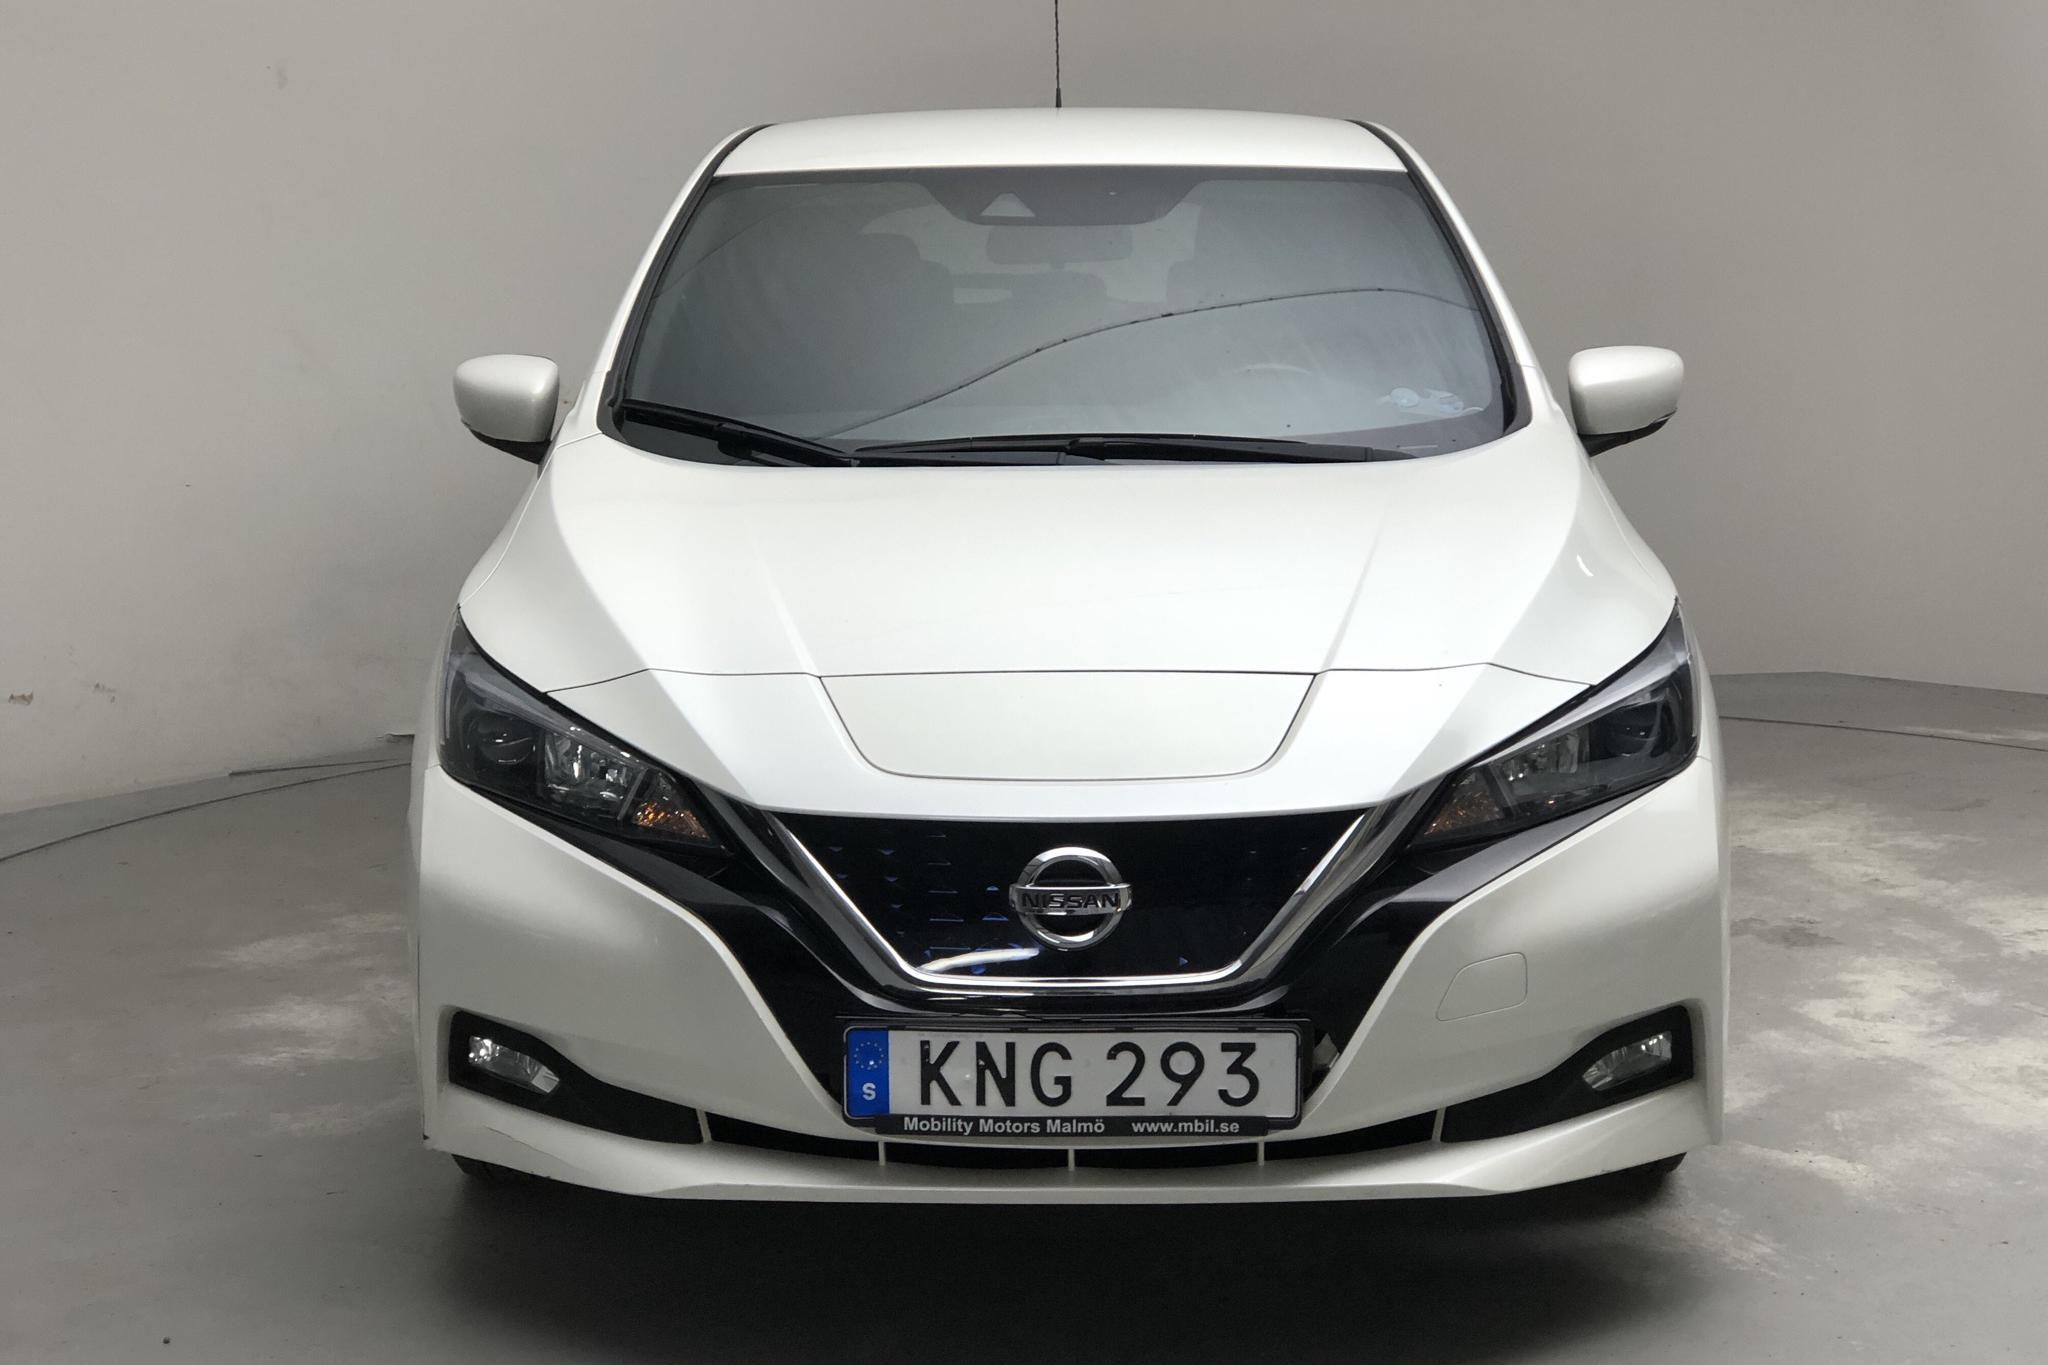 Nissan LEAF 5dr 39 kWh (150hk) - 78 950 km - Automatic - white - 2018